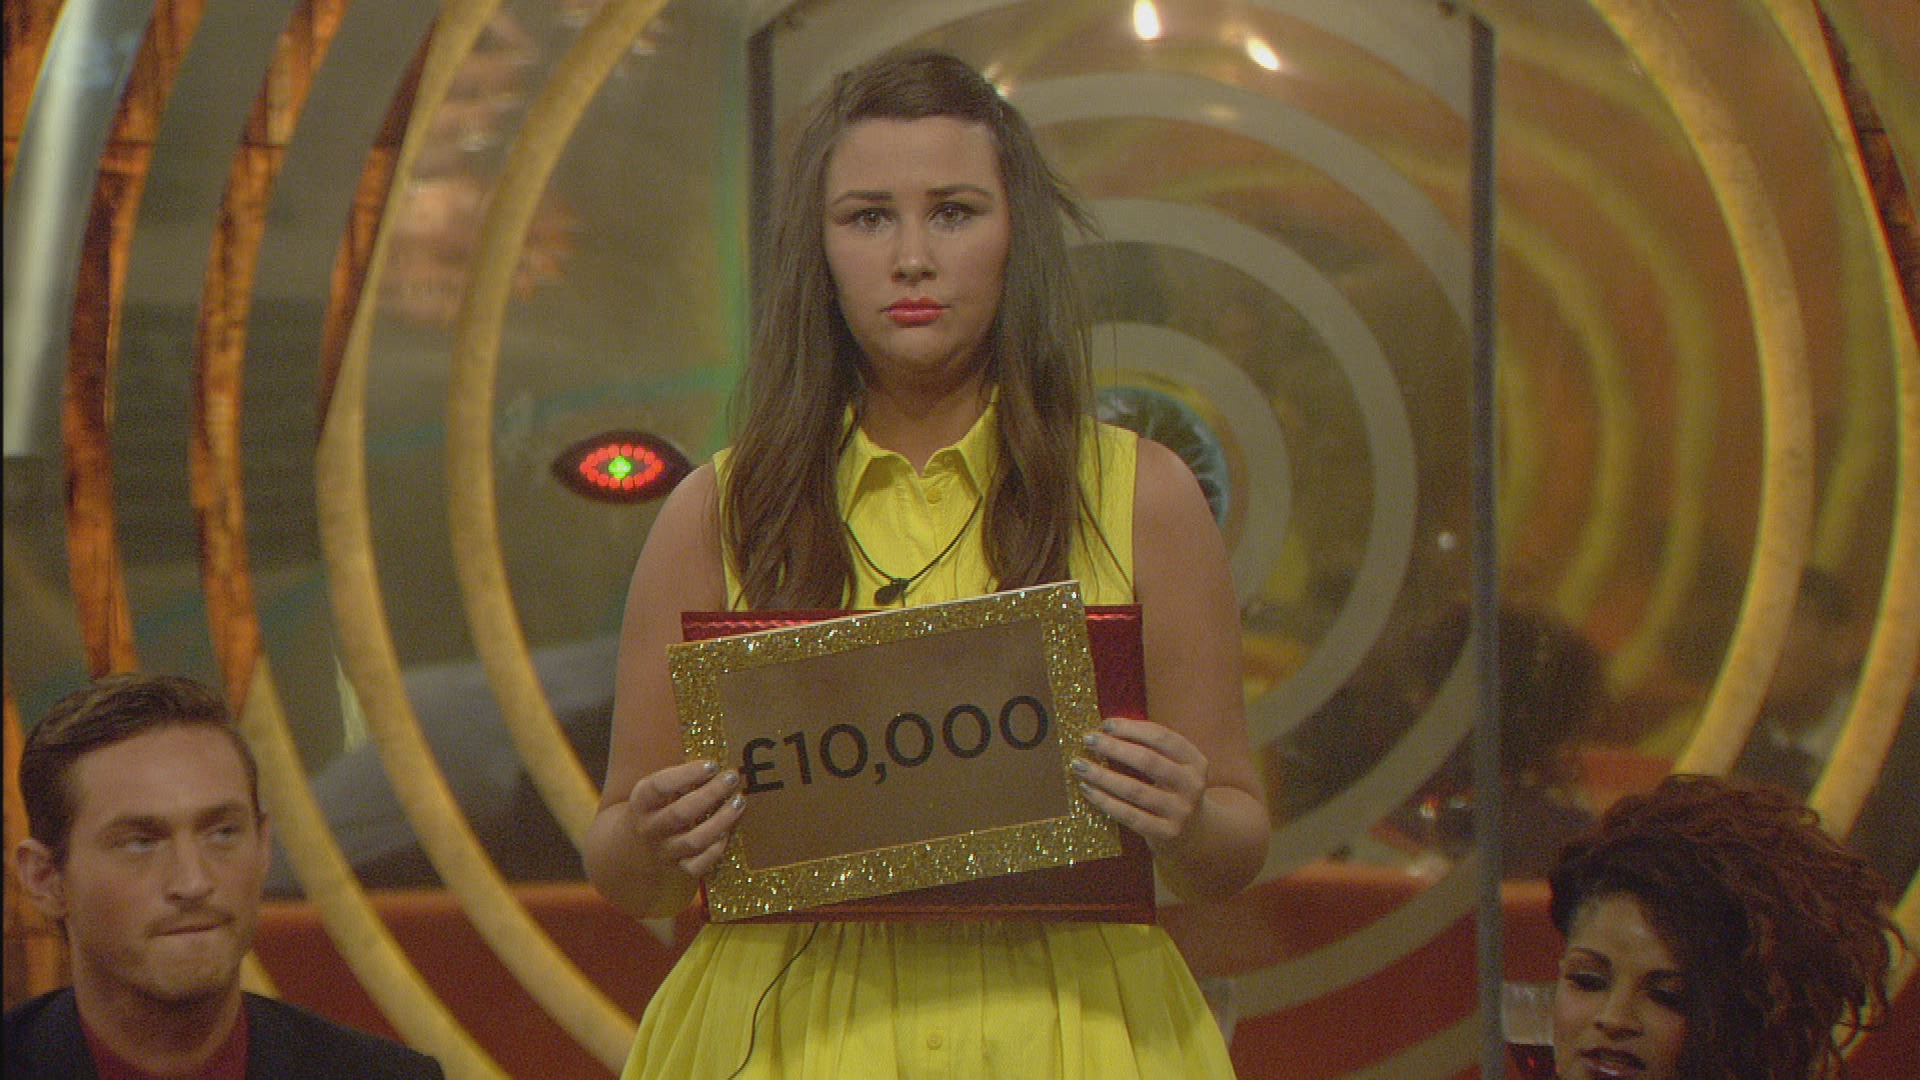 Day 61: Sam’s cashbomb eviction causes tension in the House